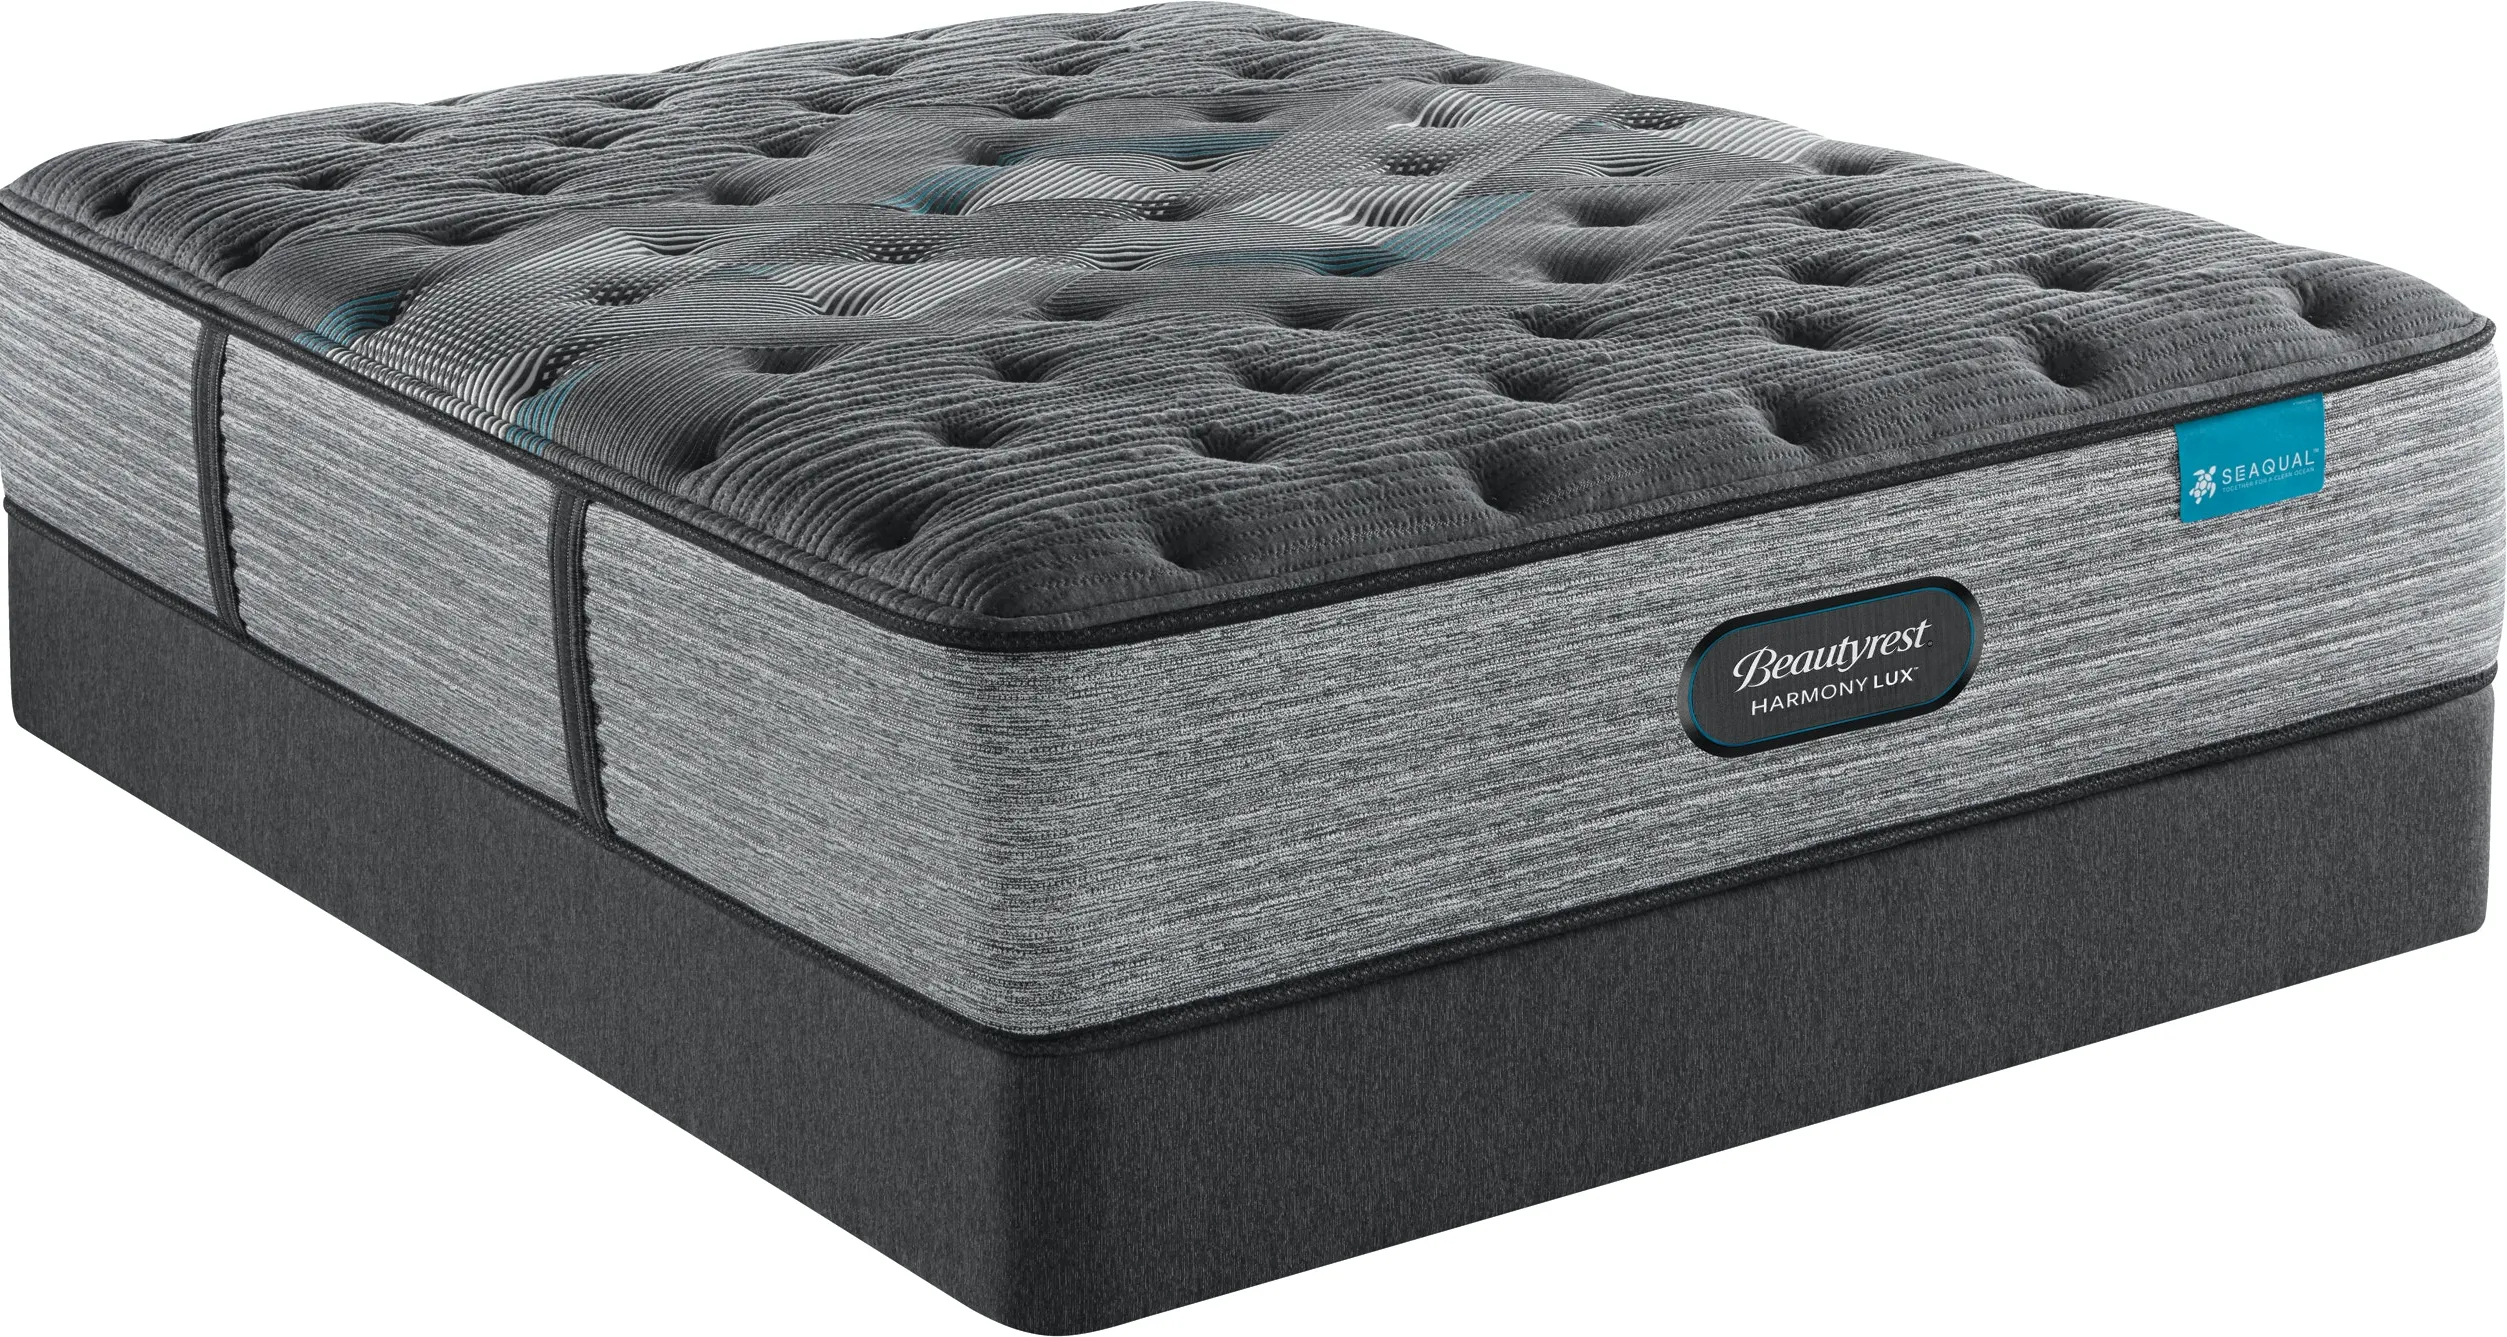 Simmons Beautyrest® Harmony Lux King Plush Mattress Only